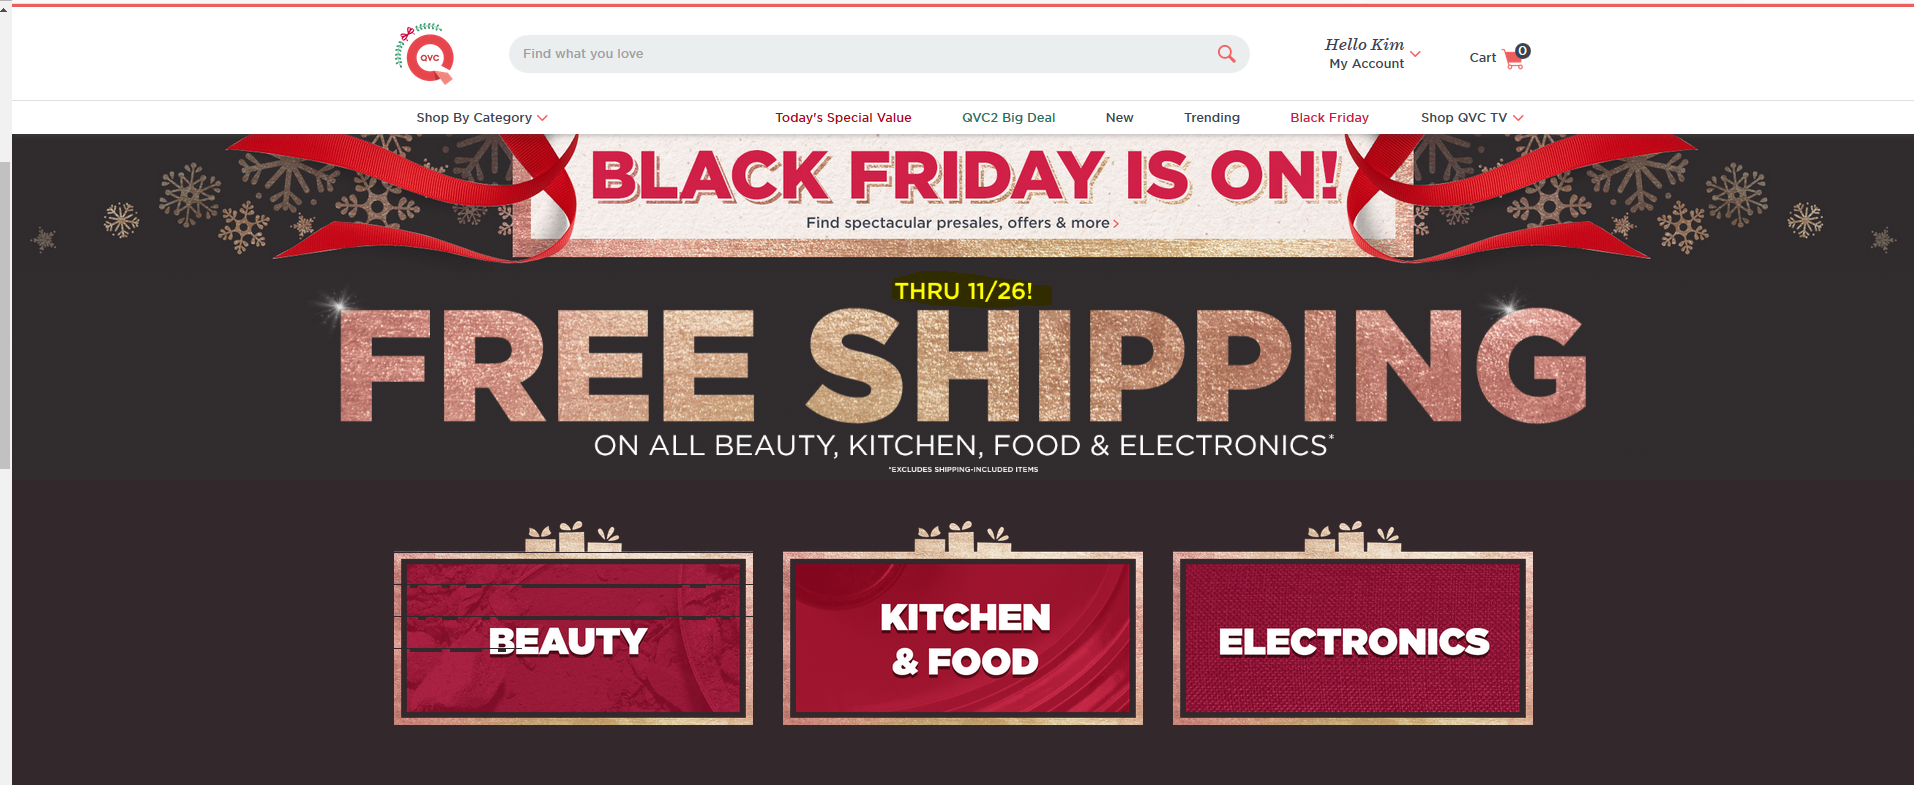 freeshipping.PNG